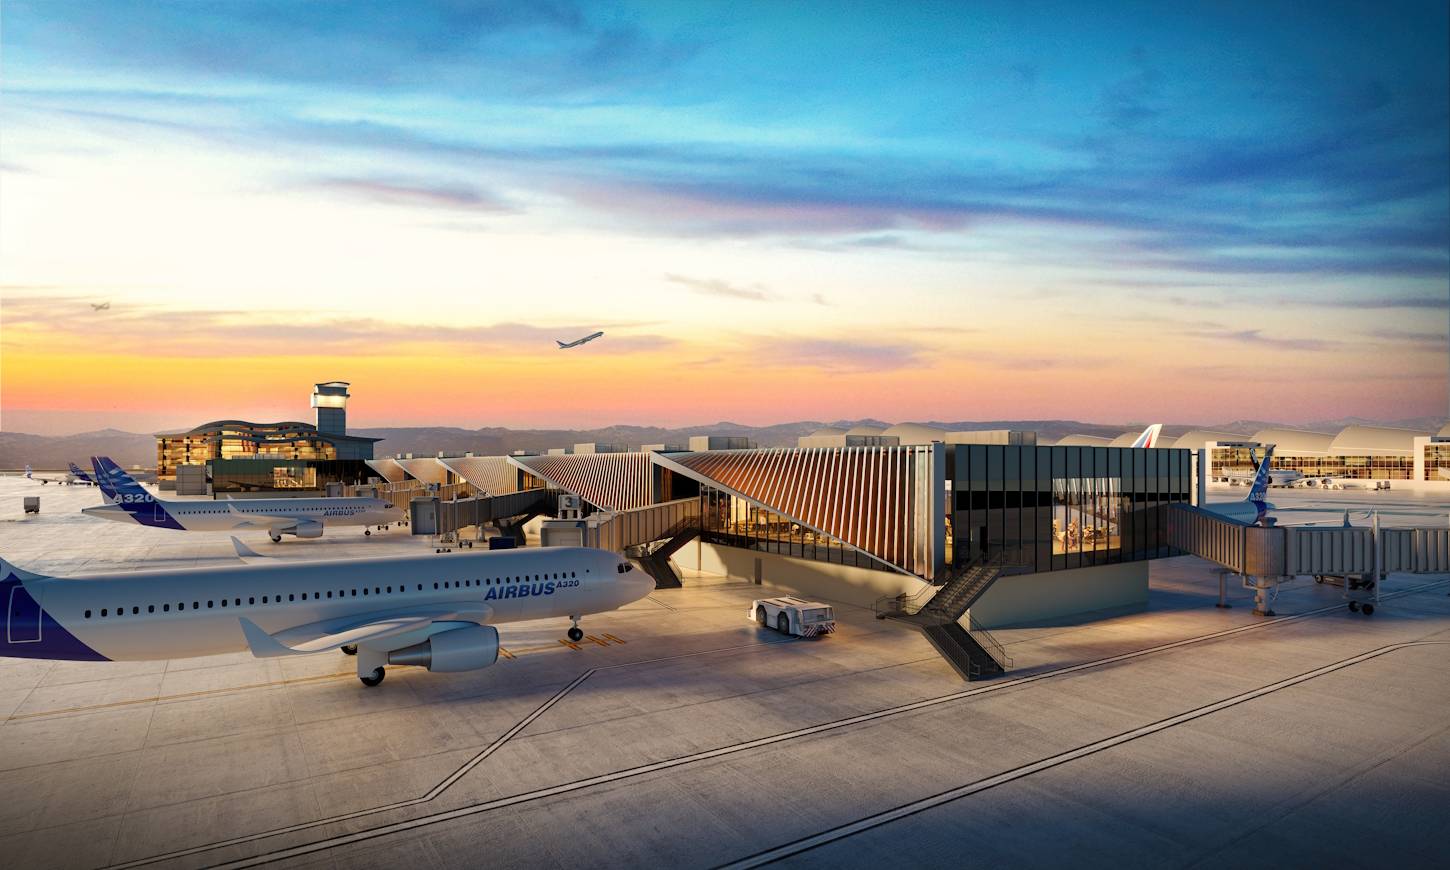 Rendering of LAX’s Midfield Satellite Concourse (MSC) South.